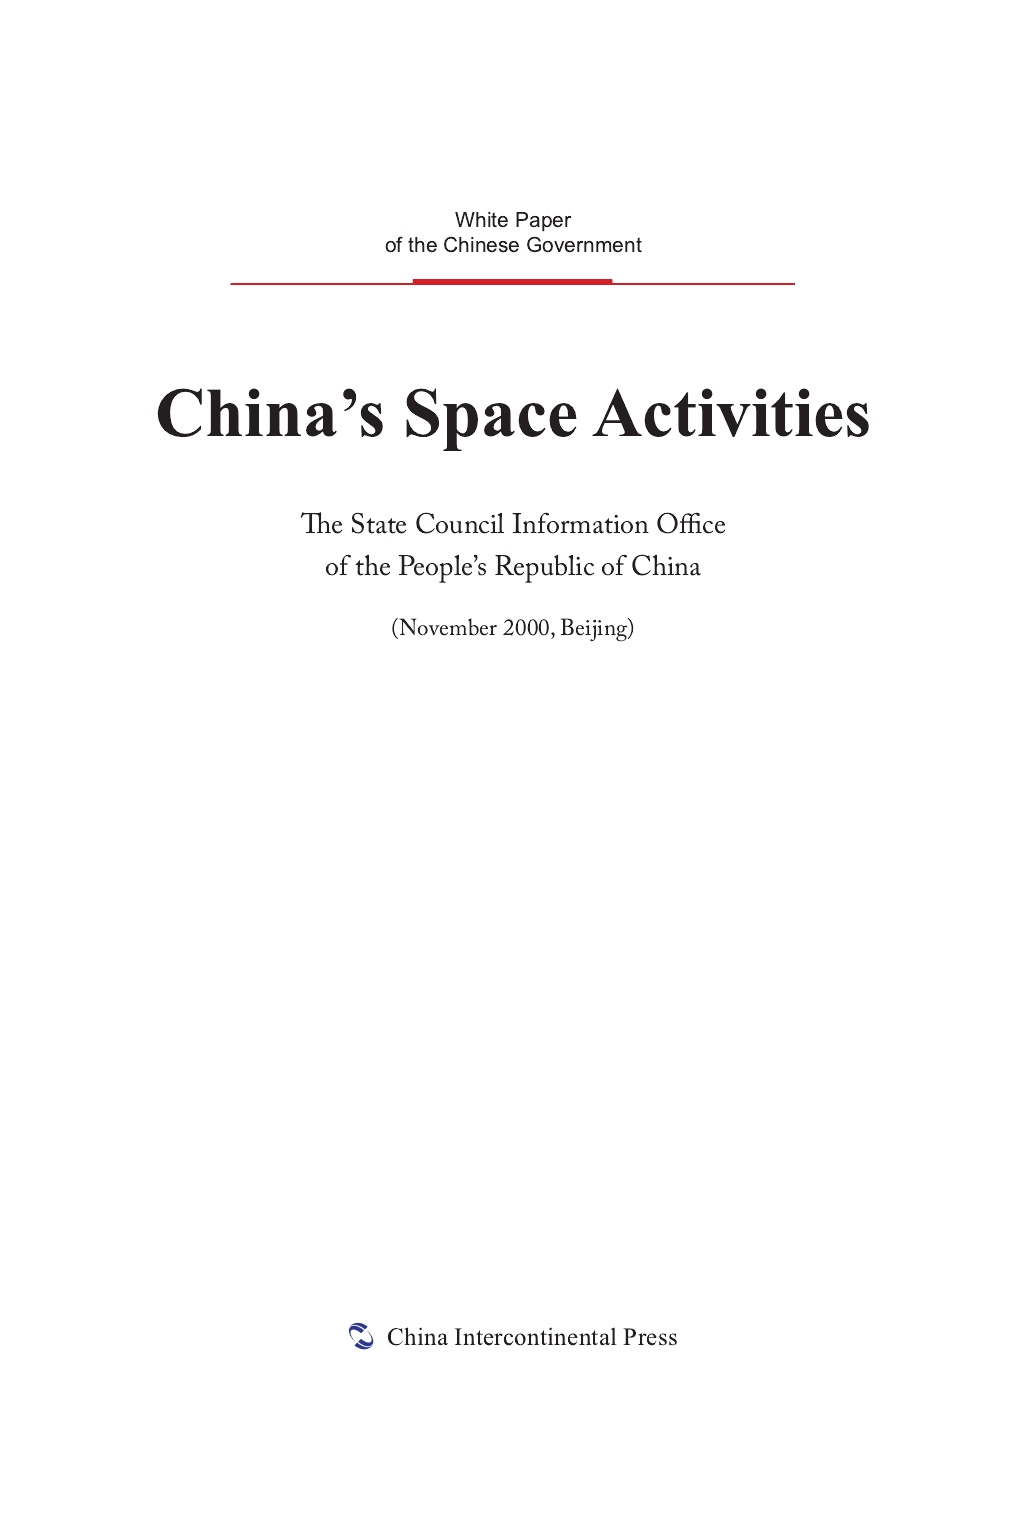 China's Space Activities